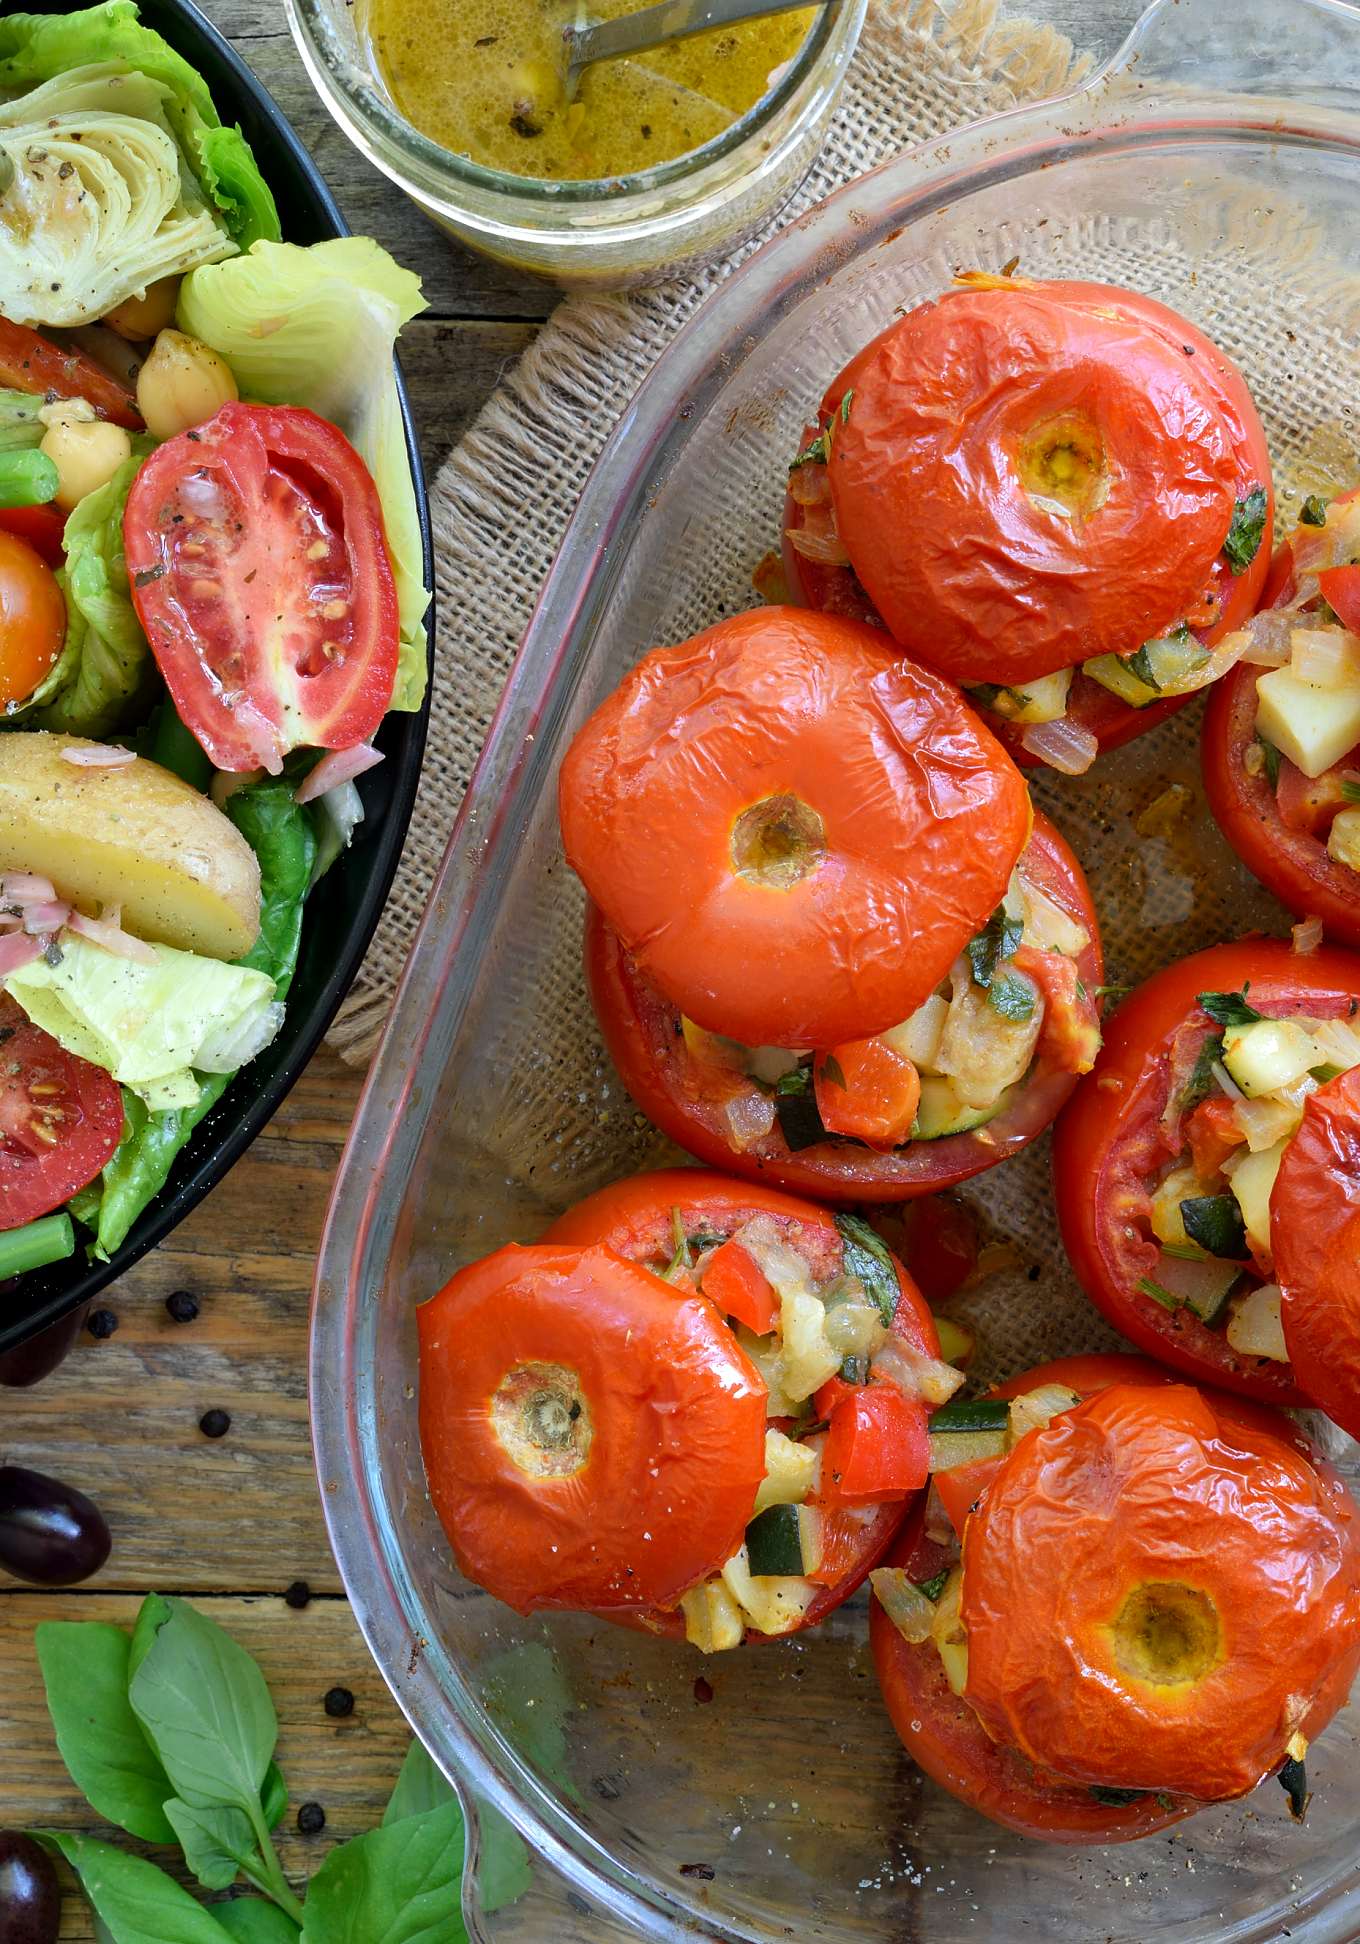 These easy vegetarian stuffed tomatoes require few ingredients and are so delicious in the summertime when tomatoes, peppers and zucchini are at their peak. This stuffed tomato recipe is great to prepare as a vegetarian or vegan side dish, starter or main dish and make a filling and delicious full meal when accompanied by a vegan Niçoise salad.